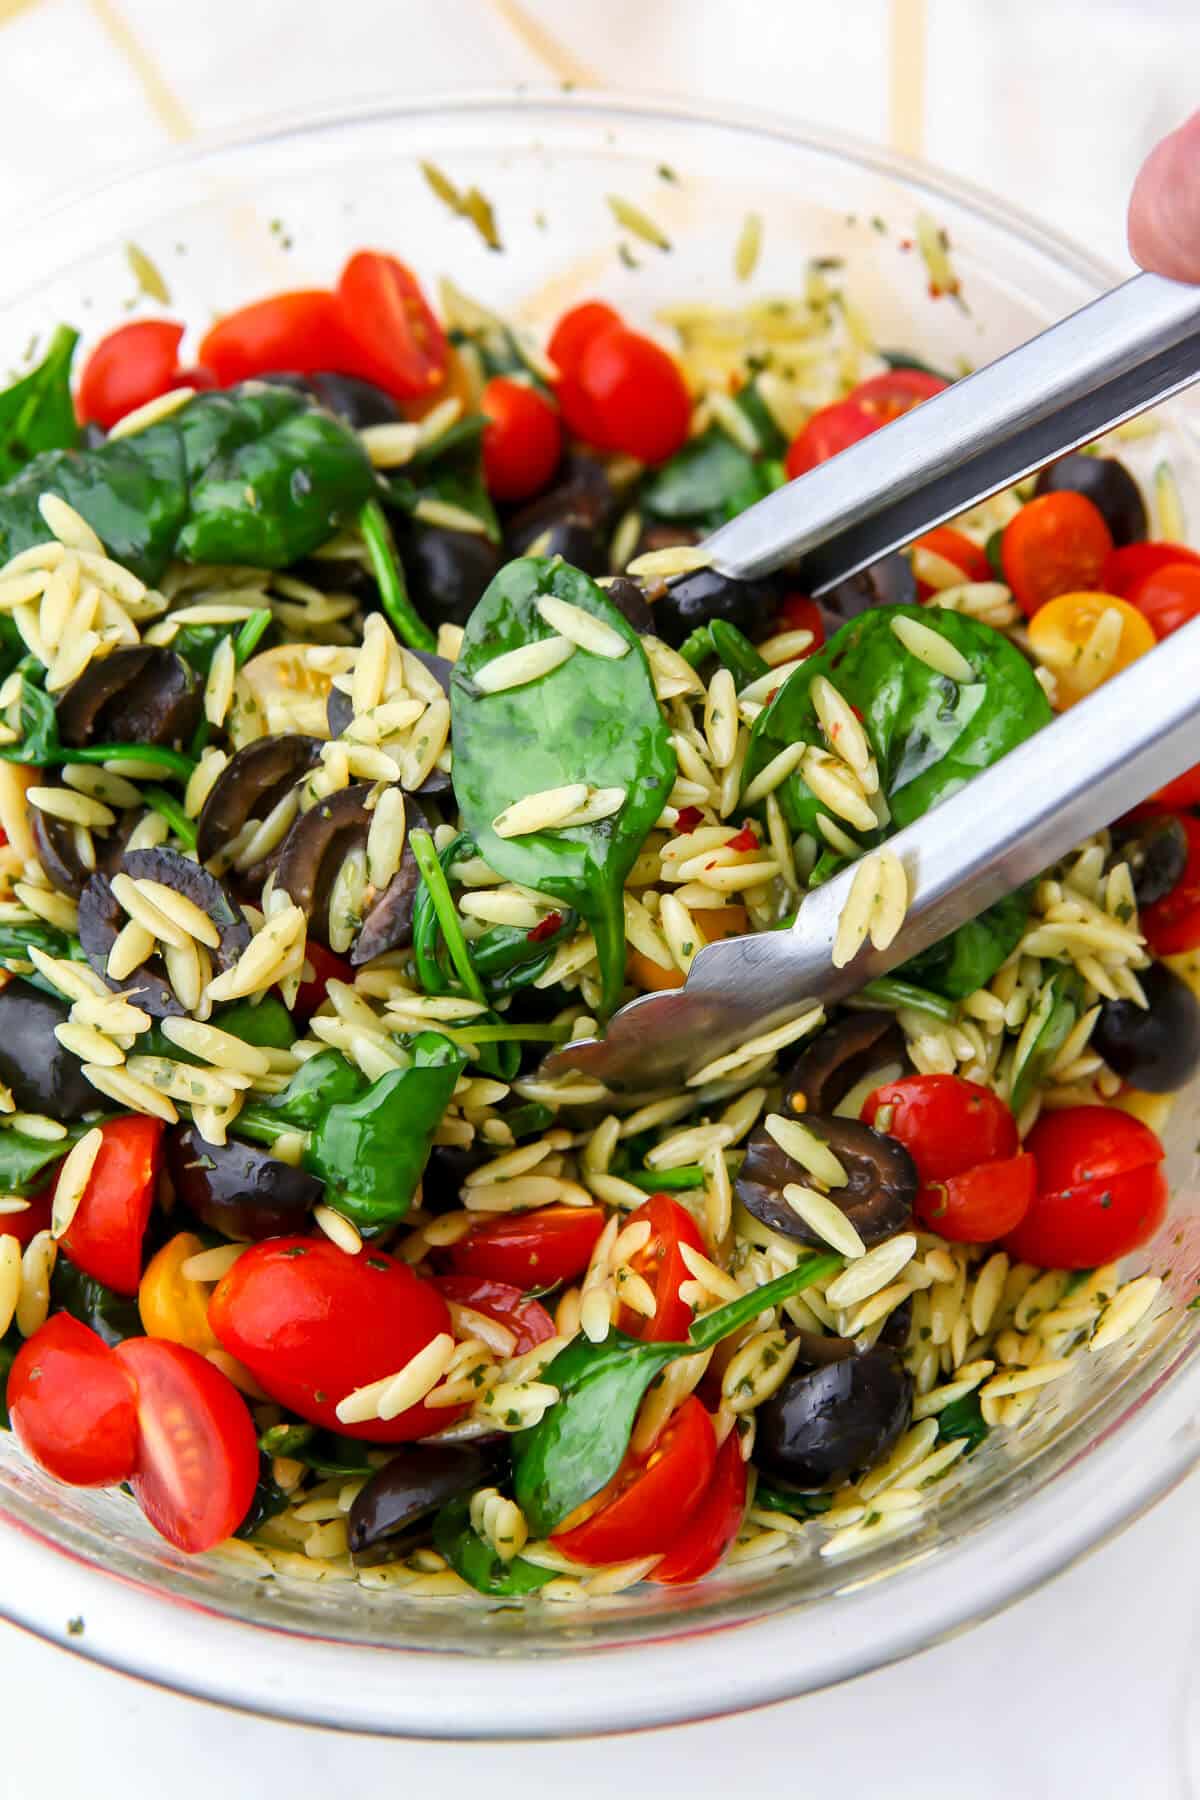 Bowl of pesto orzo salad with veggies and a pair of tongs tossing it all around.